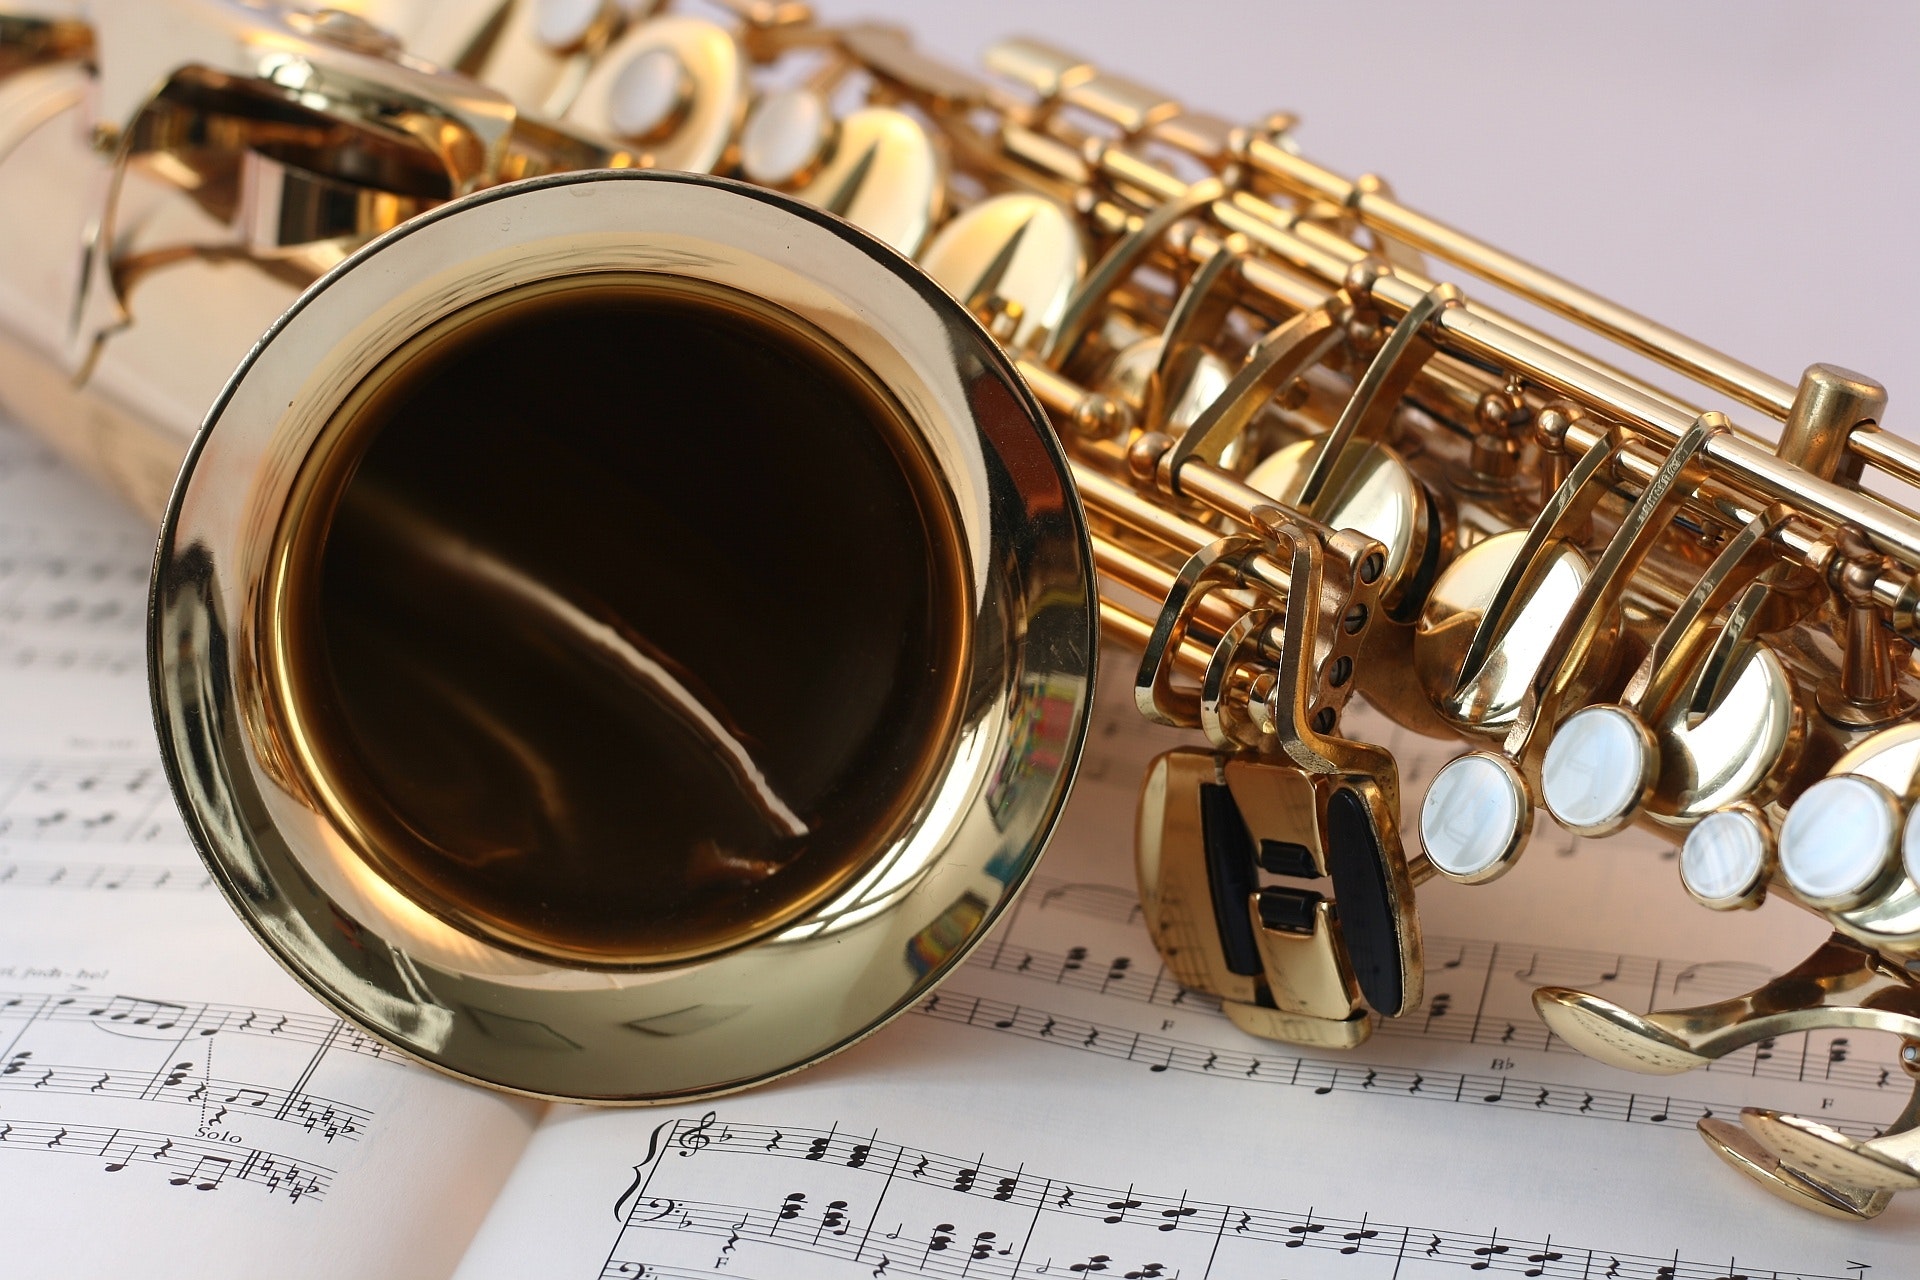 The Top 6 Musical Instruments For Children To Learn